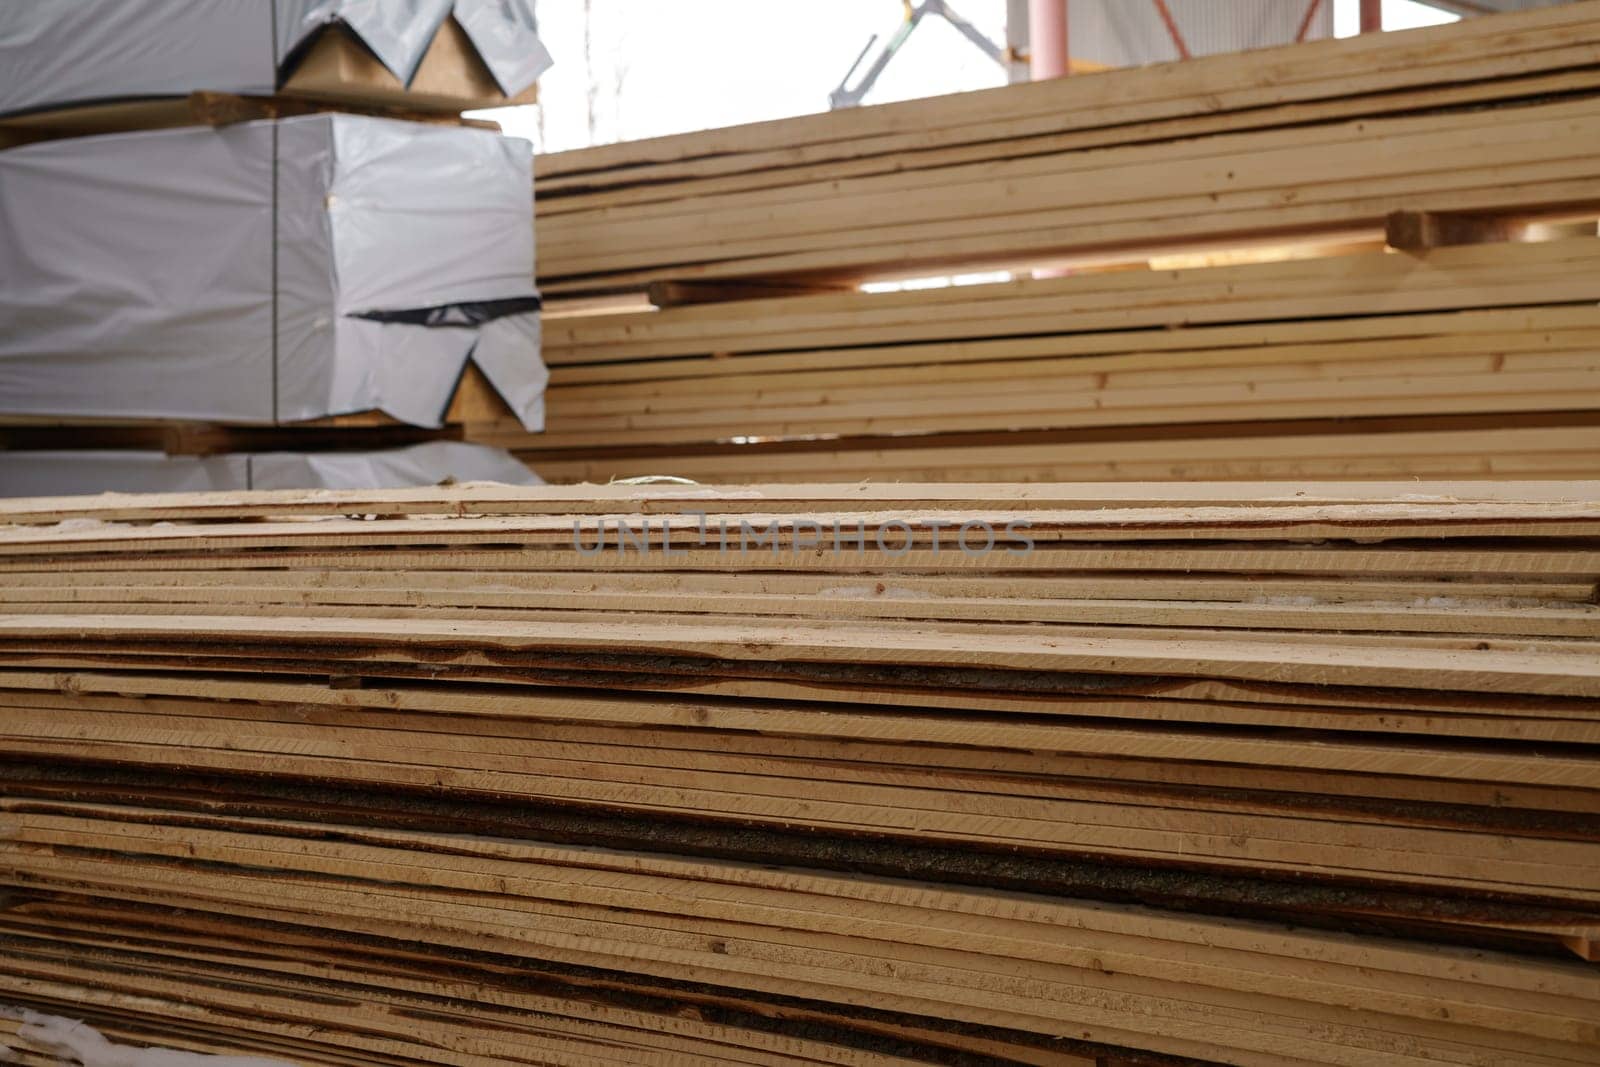 Woodworking. Image of wooden boards piled at sawmill